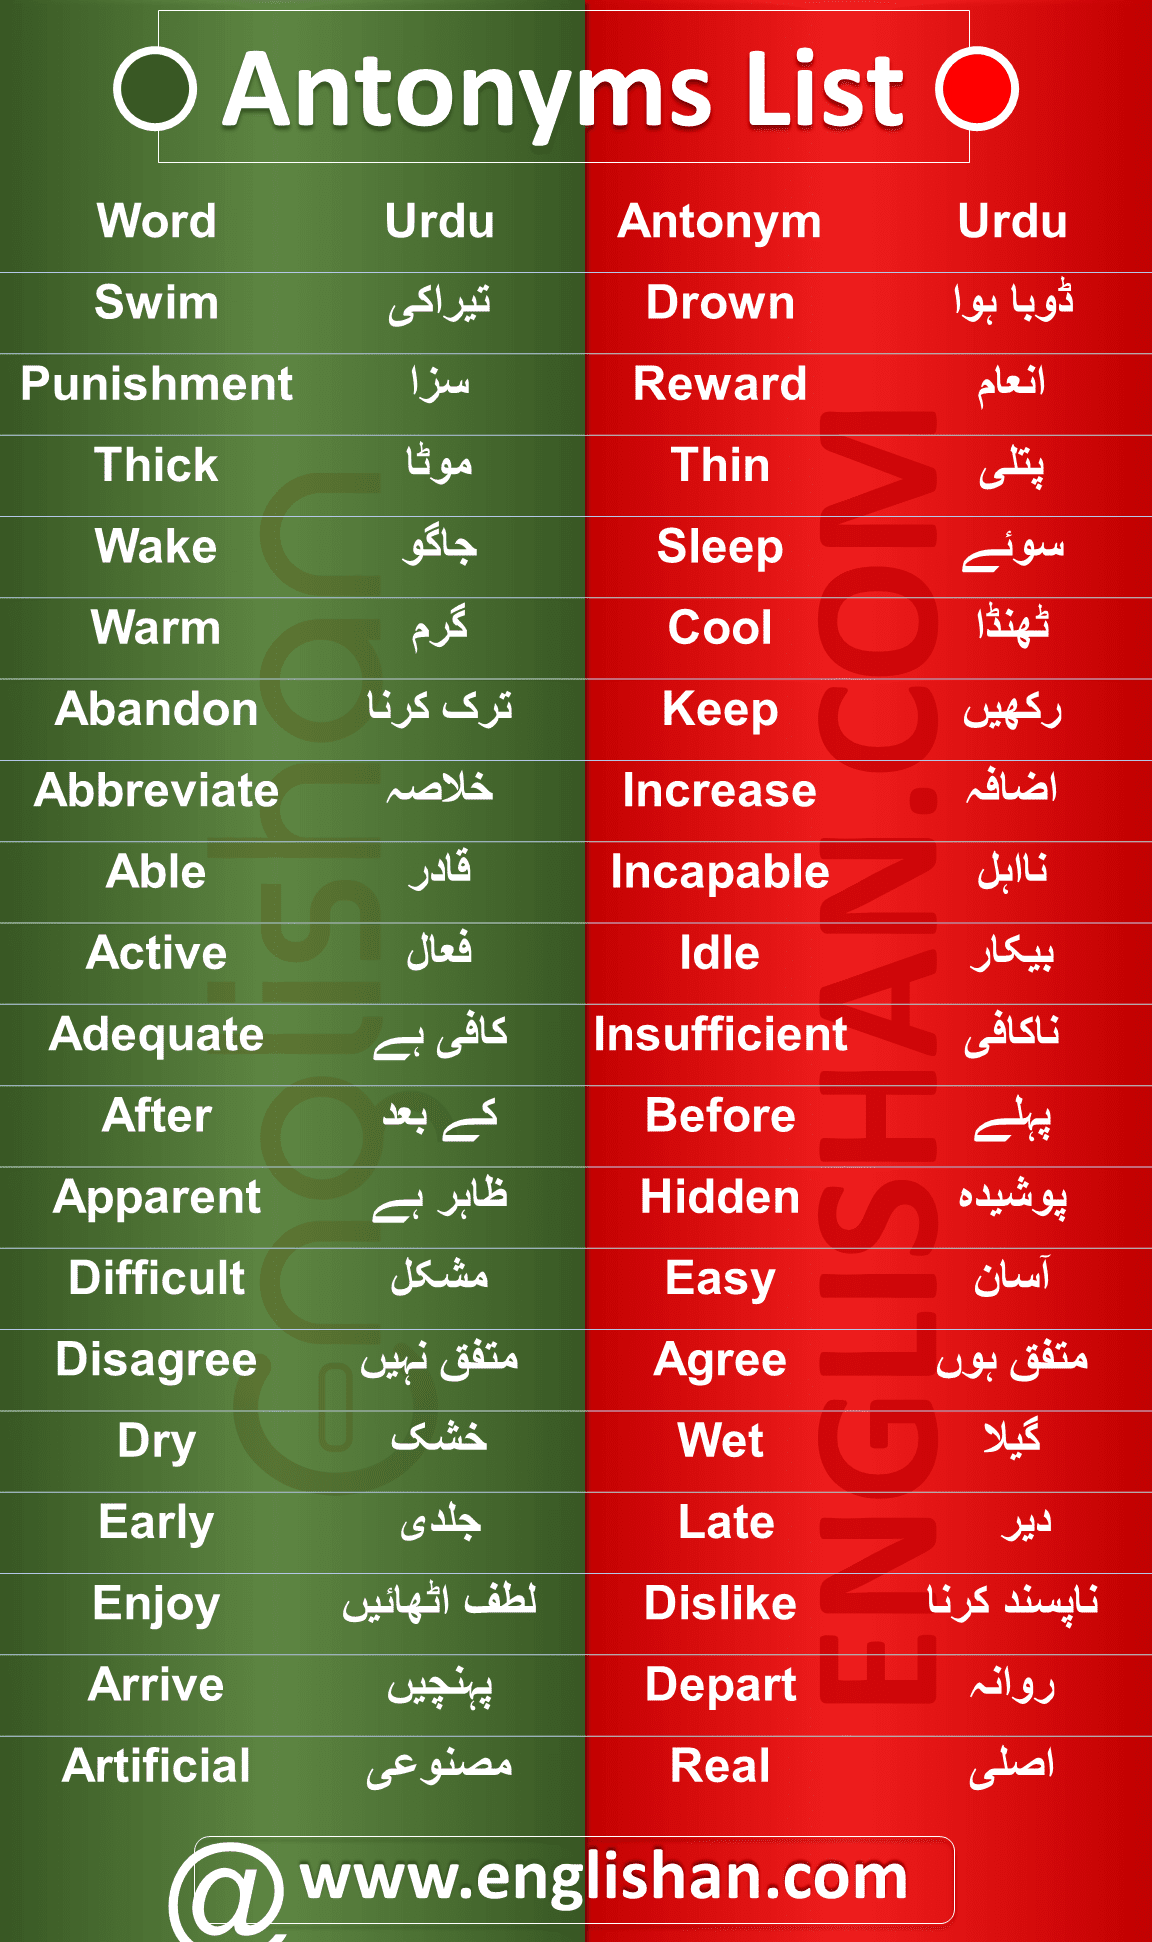 Difficult Antonyms List with English to Urdu